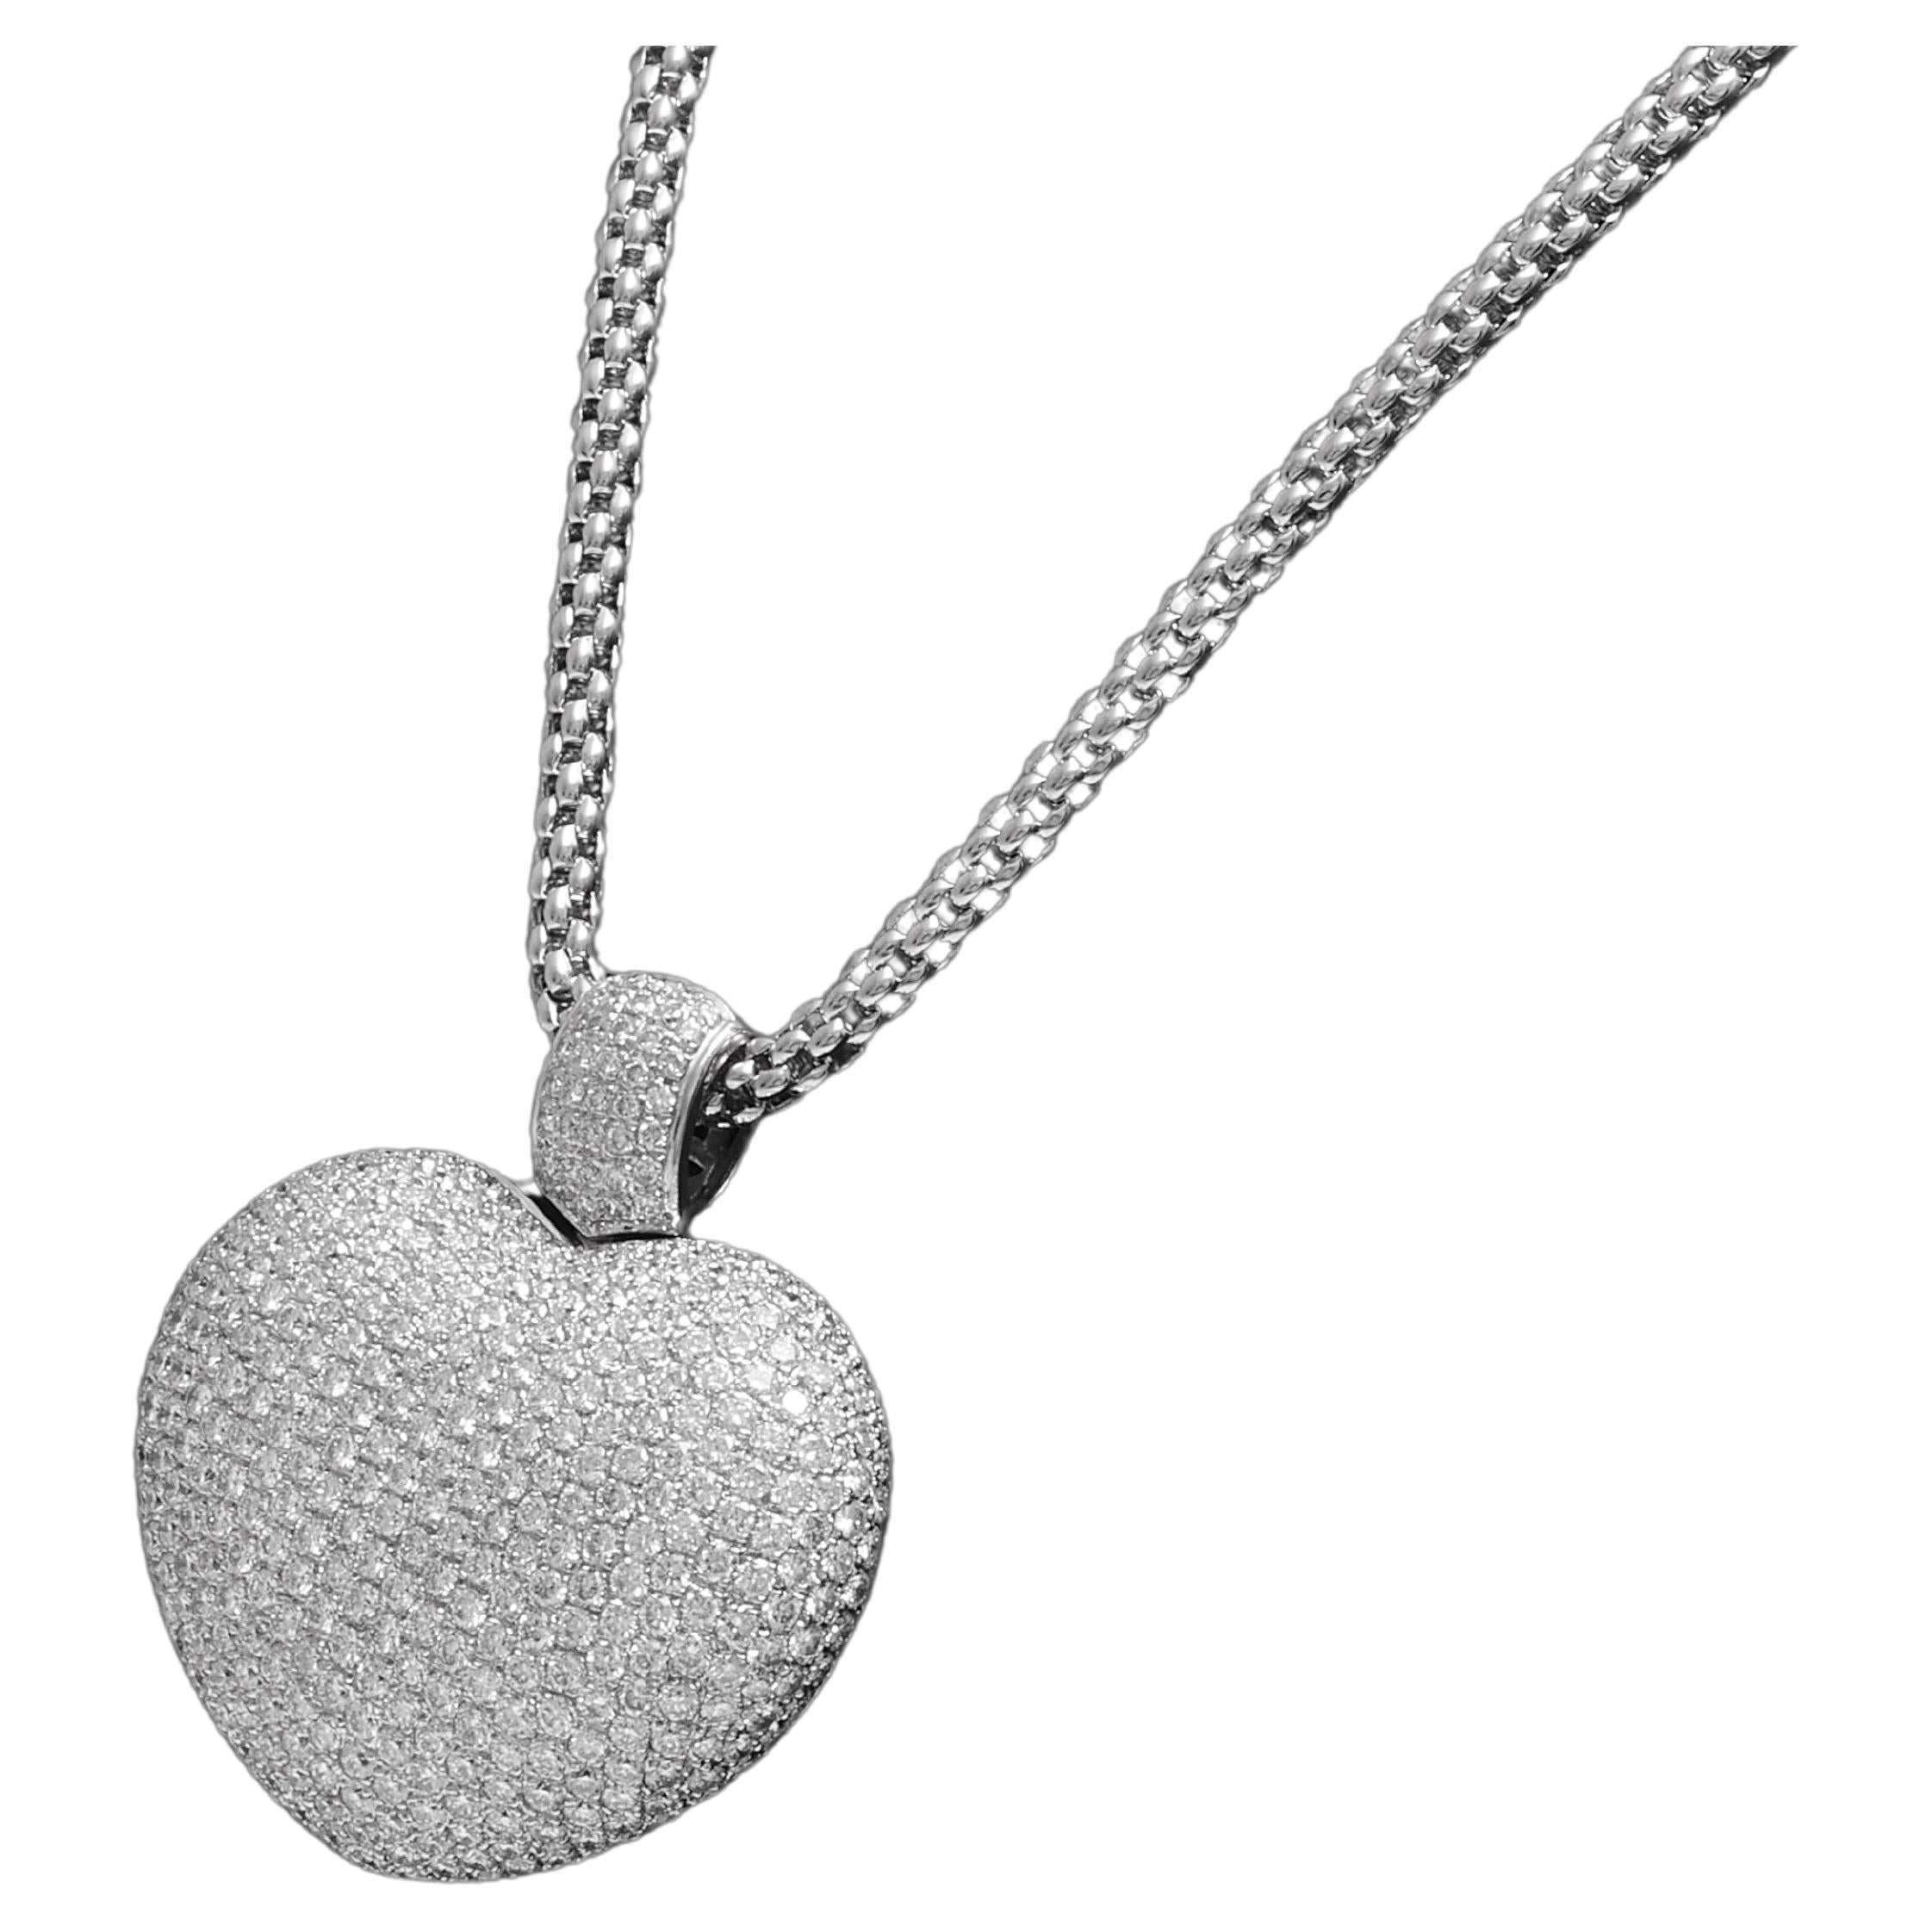 18kt White Gold Heart Pendant With 17 ct. Diamonds With 18kt White Gold Necklace